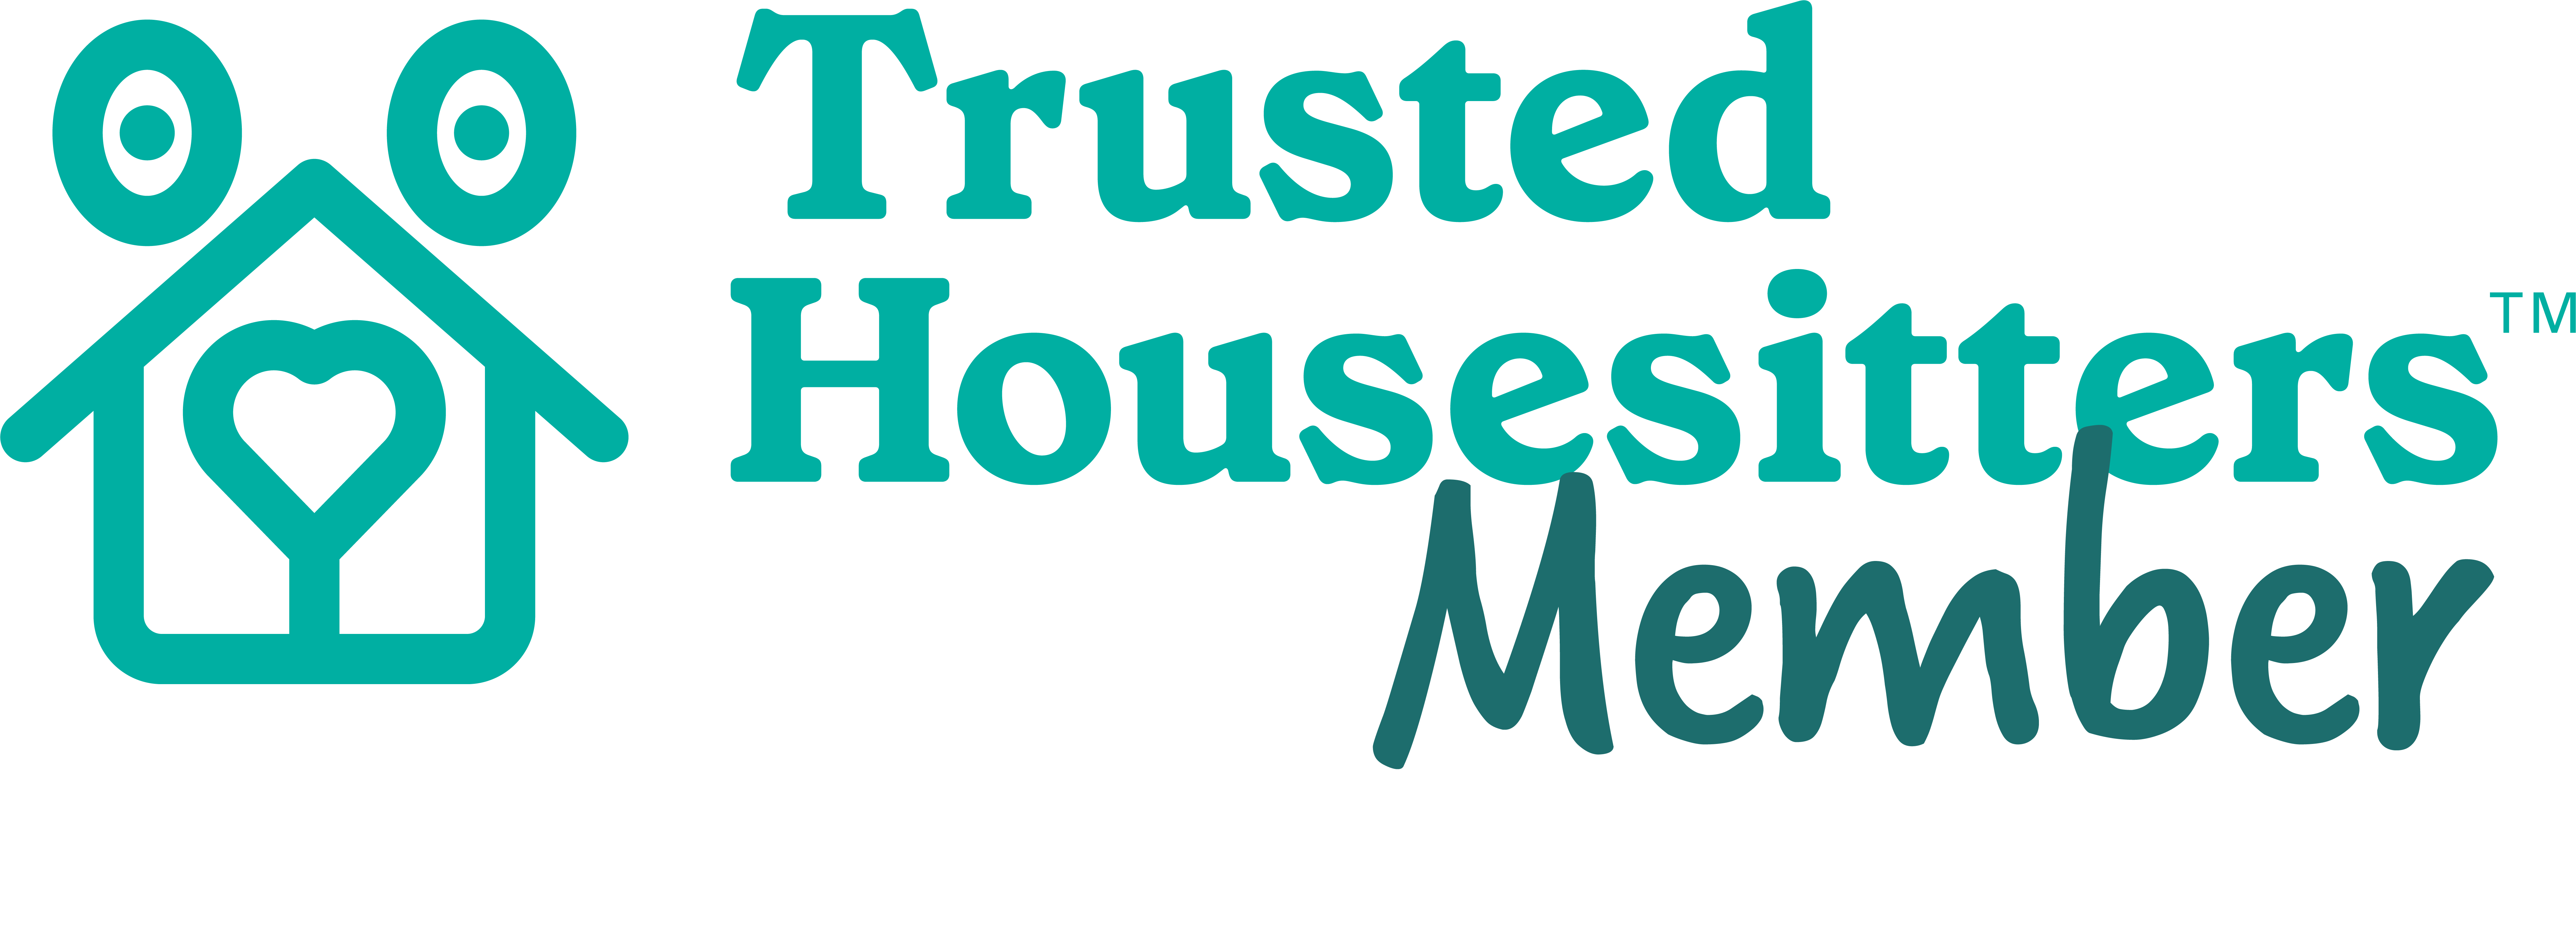 We use TRUSTED HOUSESITTERS